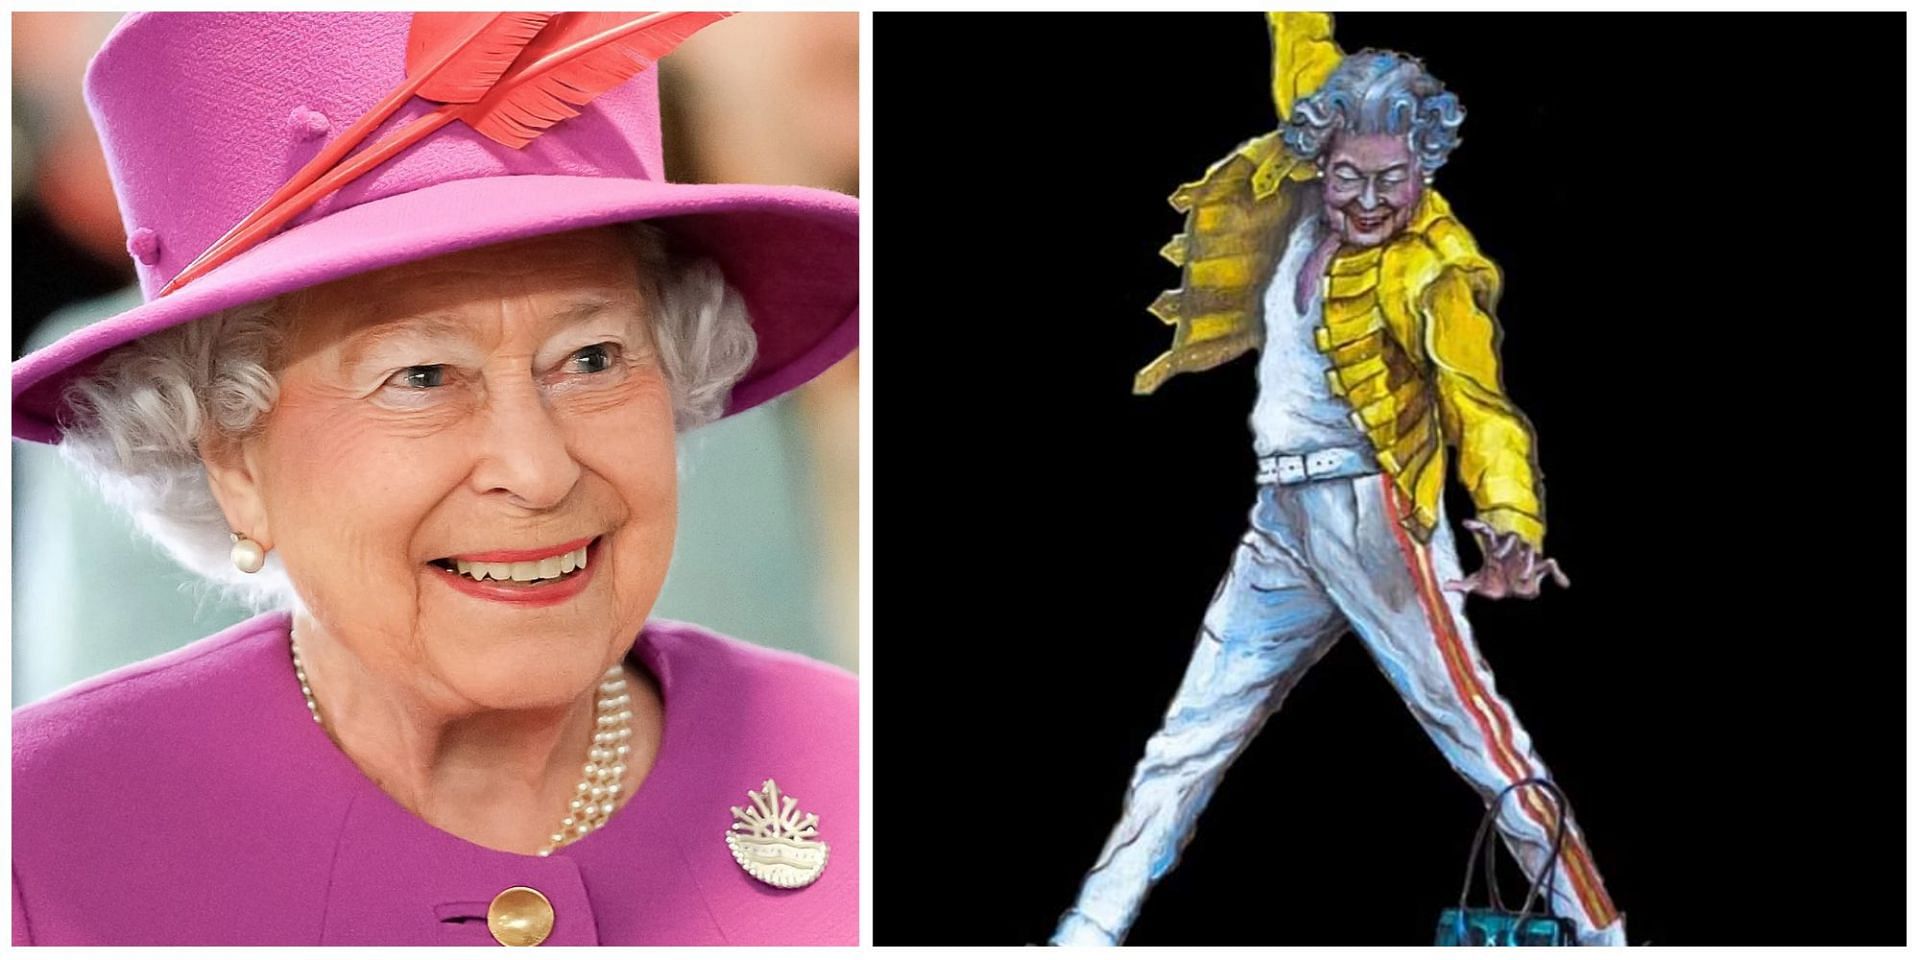 Is the viral picture in which Queen Elizabeth is dressed up as Freddie Mercury made by Banksy? Truth Explored. (Image via Twitter)